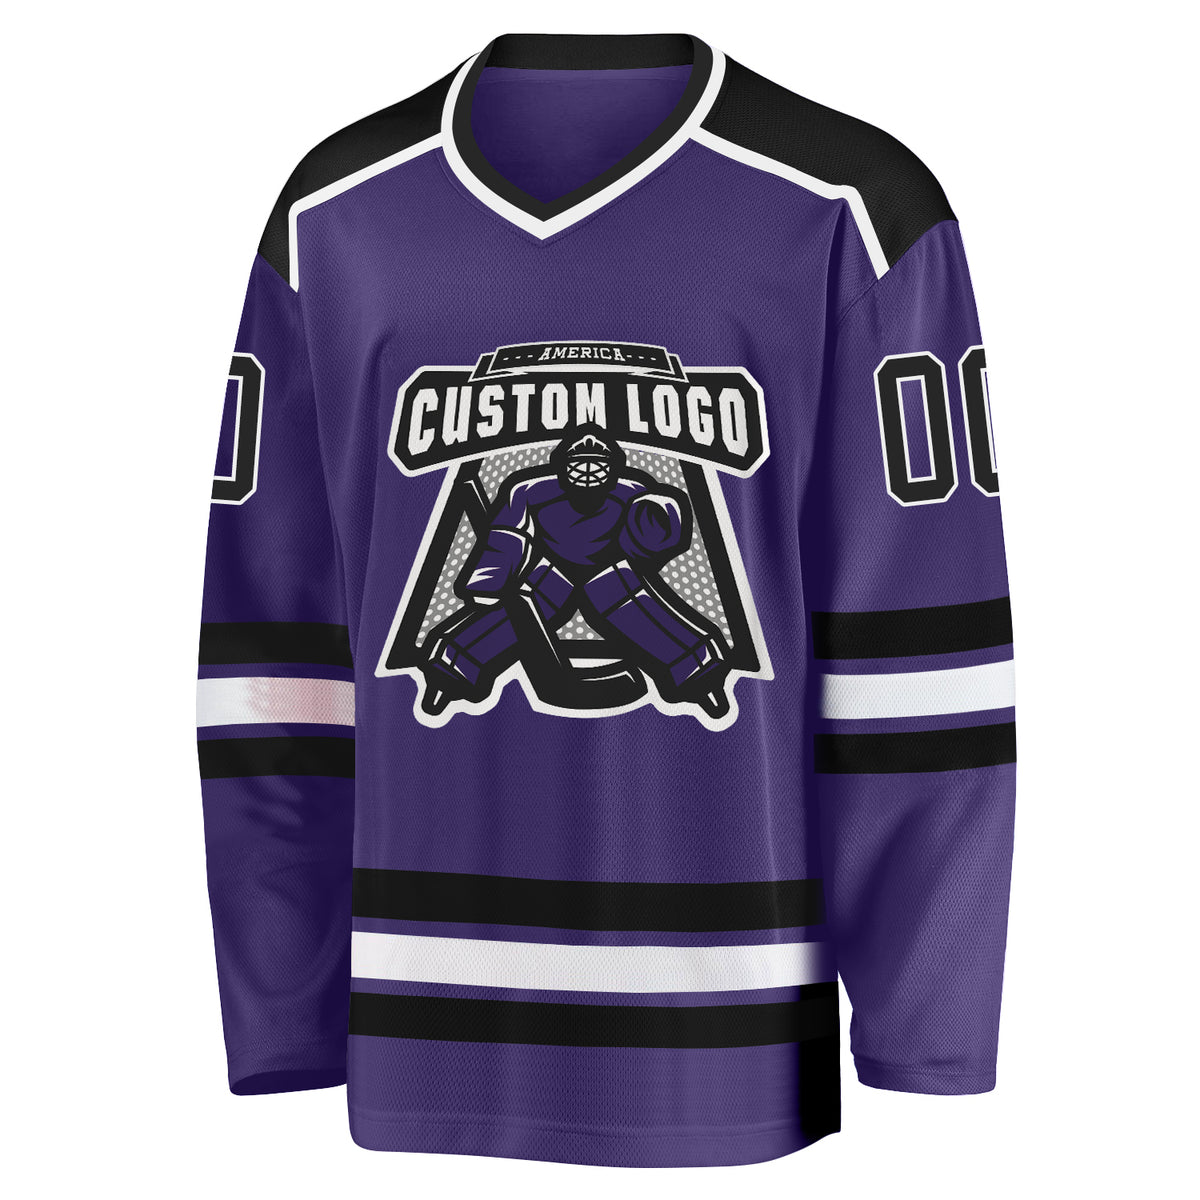 Athletic Knit Los Angeles Kings Uncrested Adult Hockey Jersey in Black/White/Silver Size Small